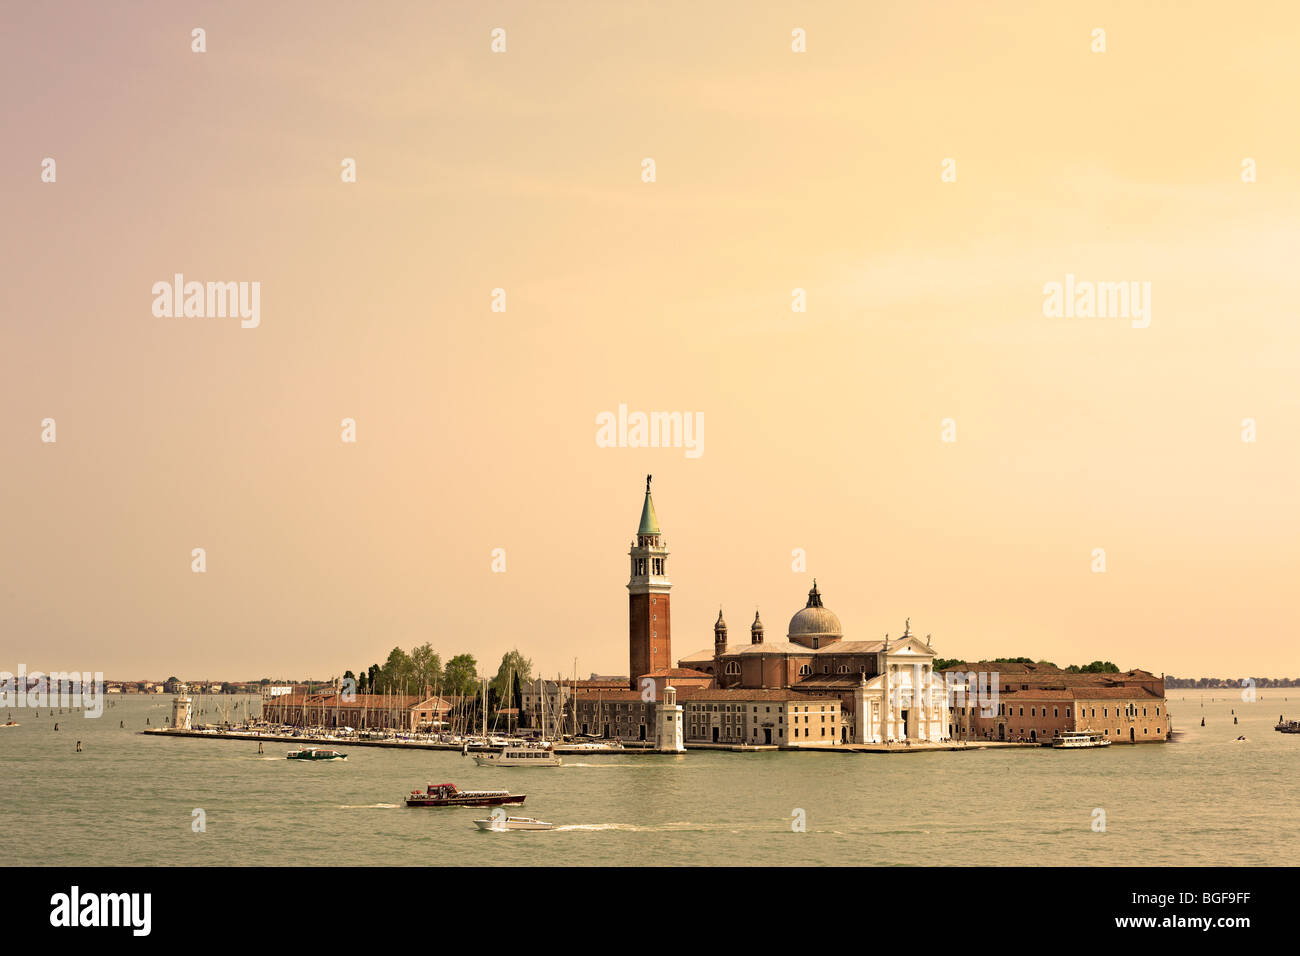 - giorgio at images stock San maggiore dusk photography and hi-res Alamy